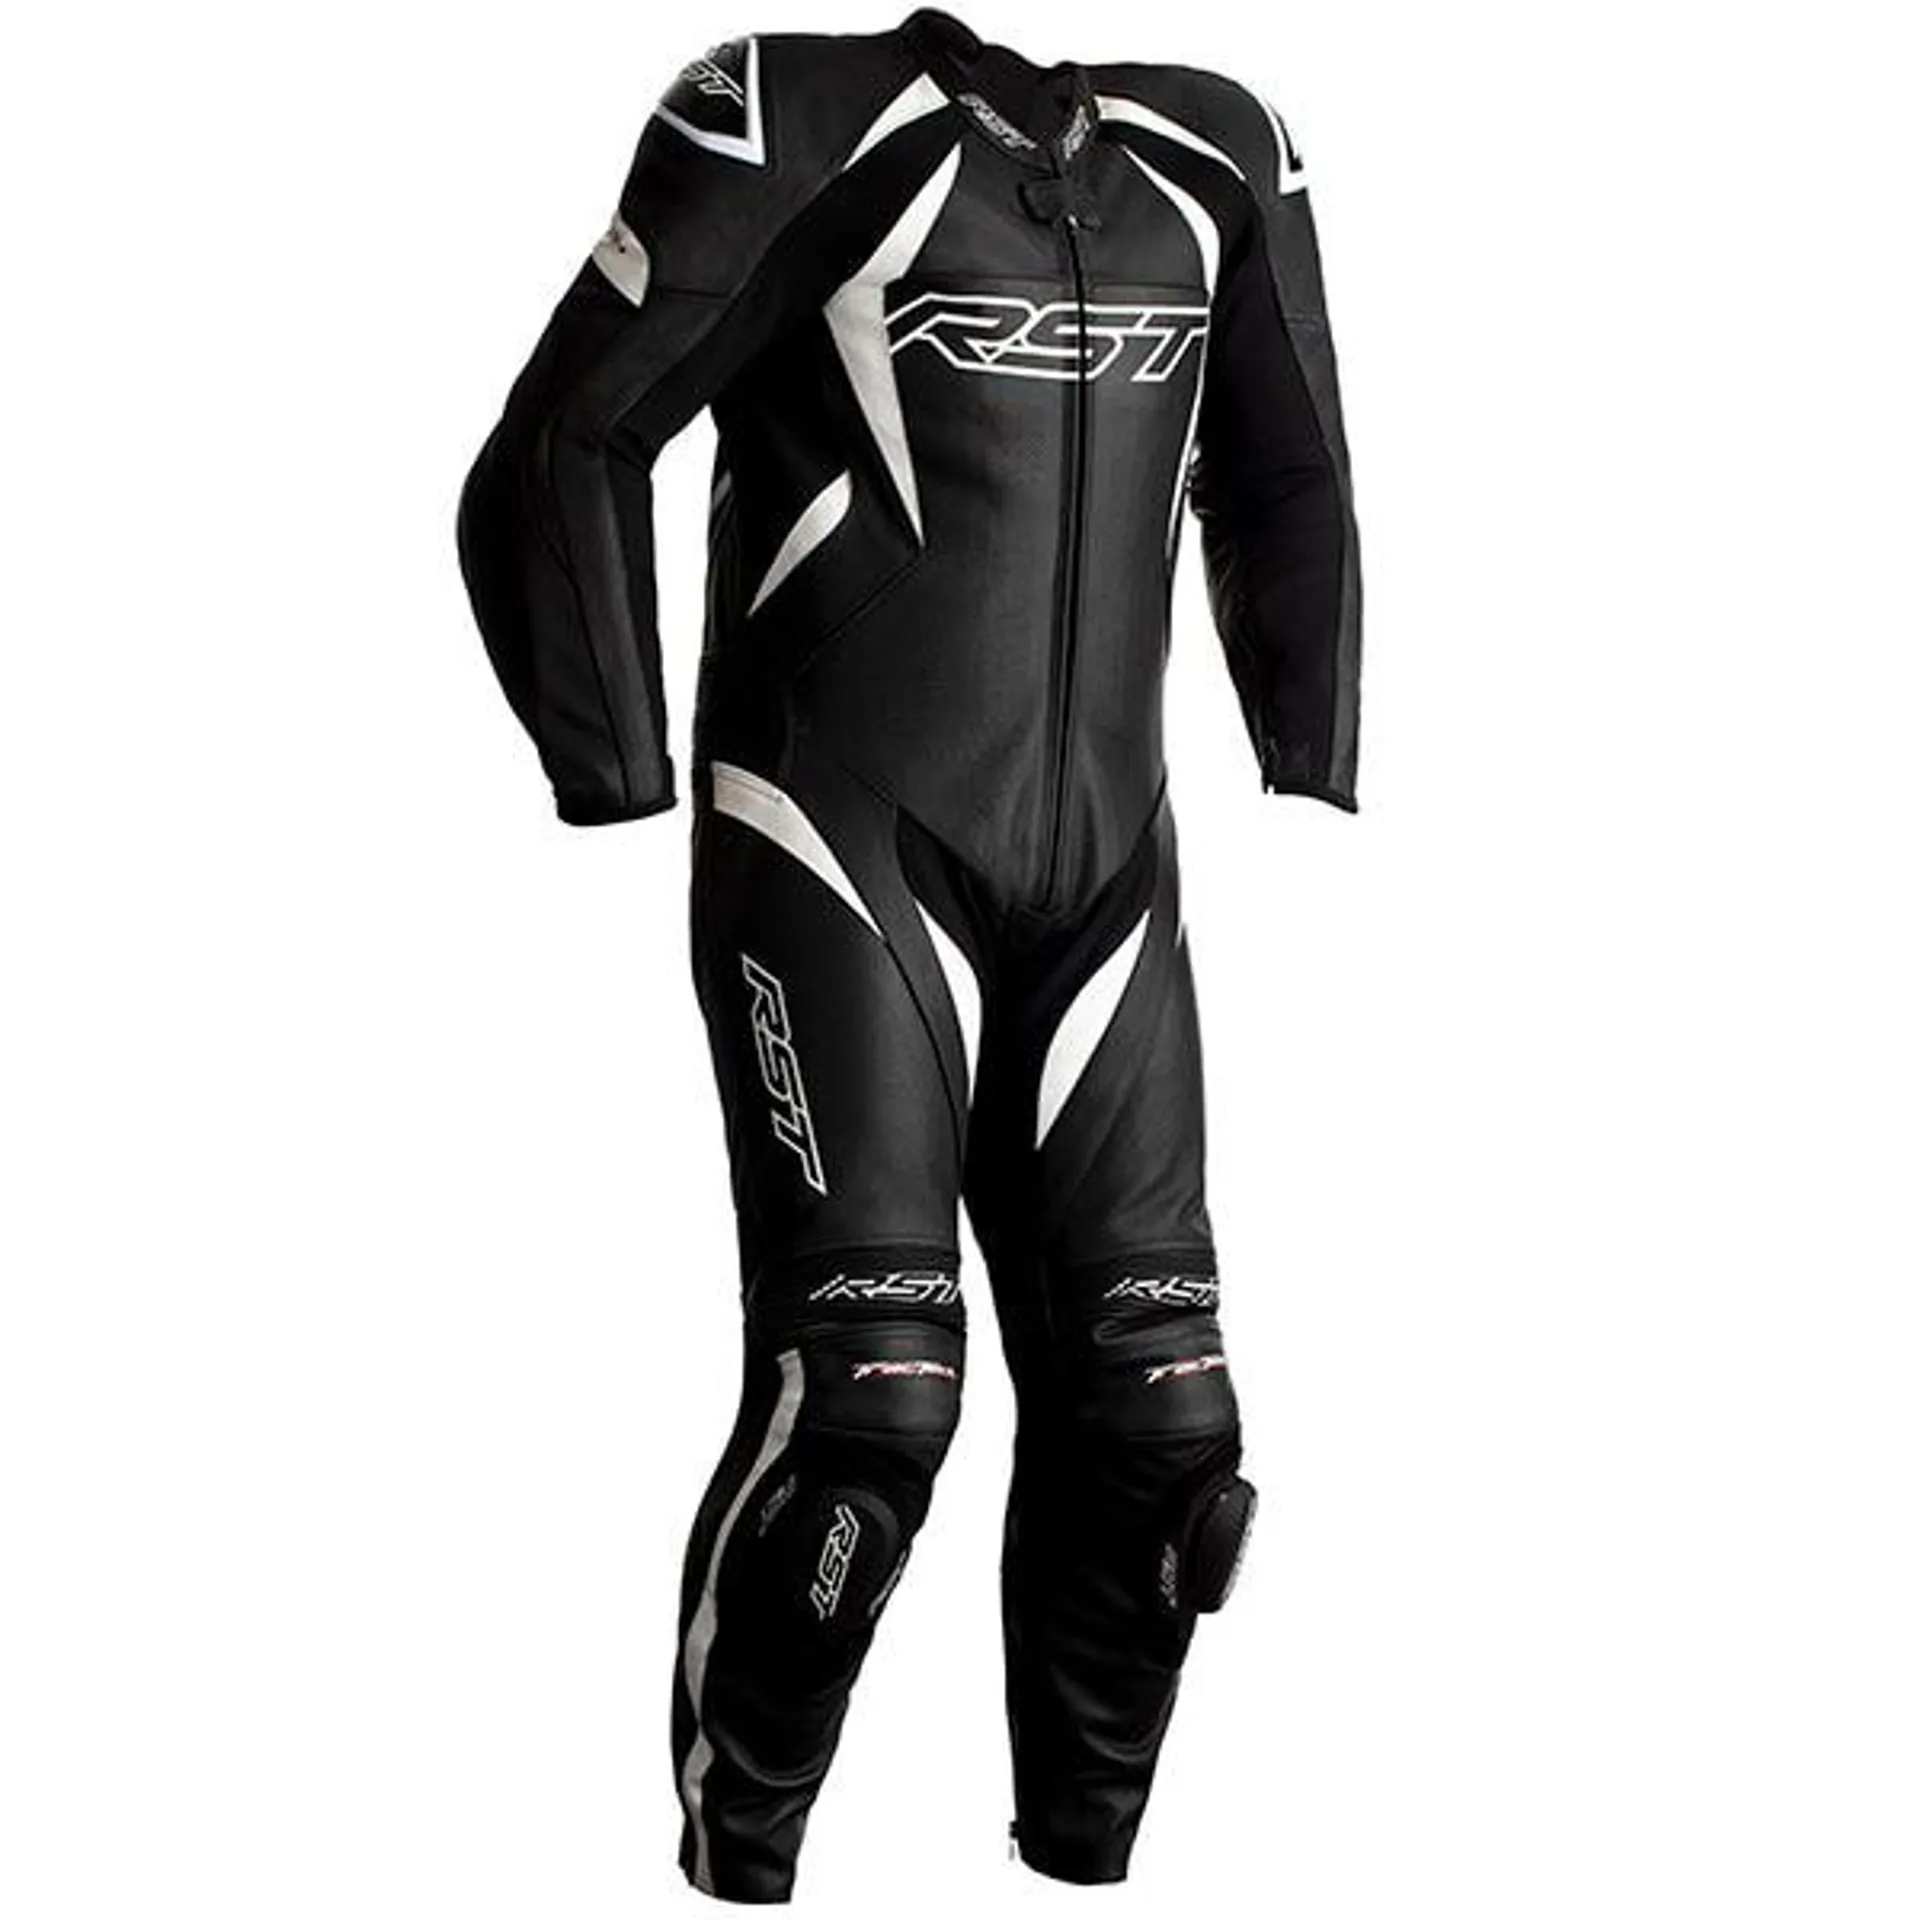 RST Tractech Evo 4 CE One Piece Leather Suit - Black / White